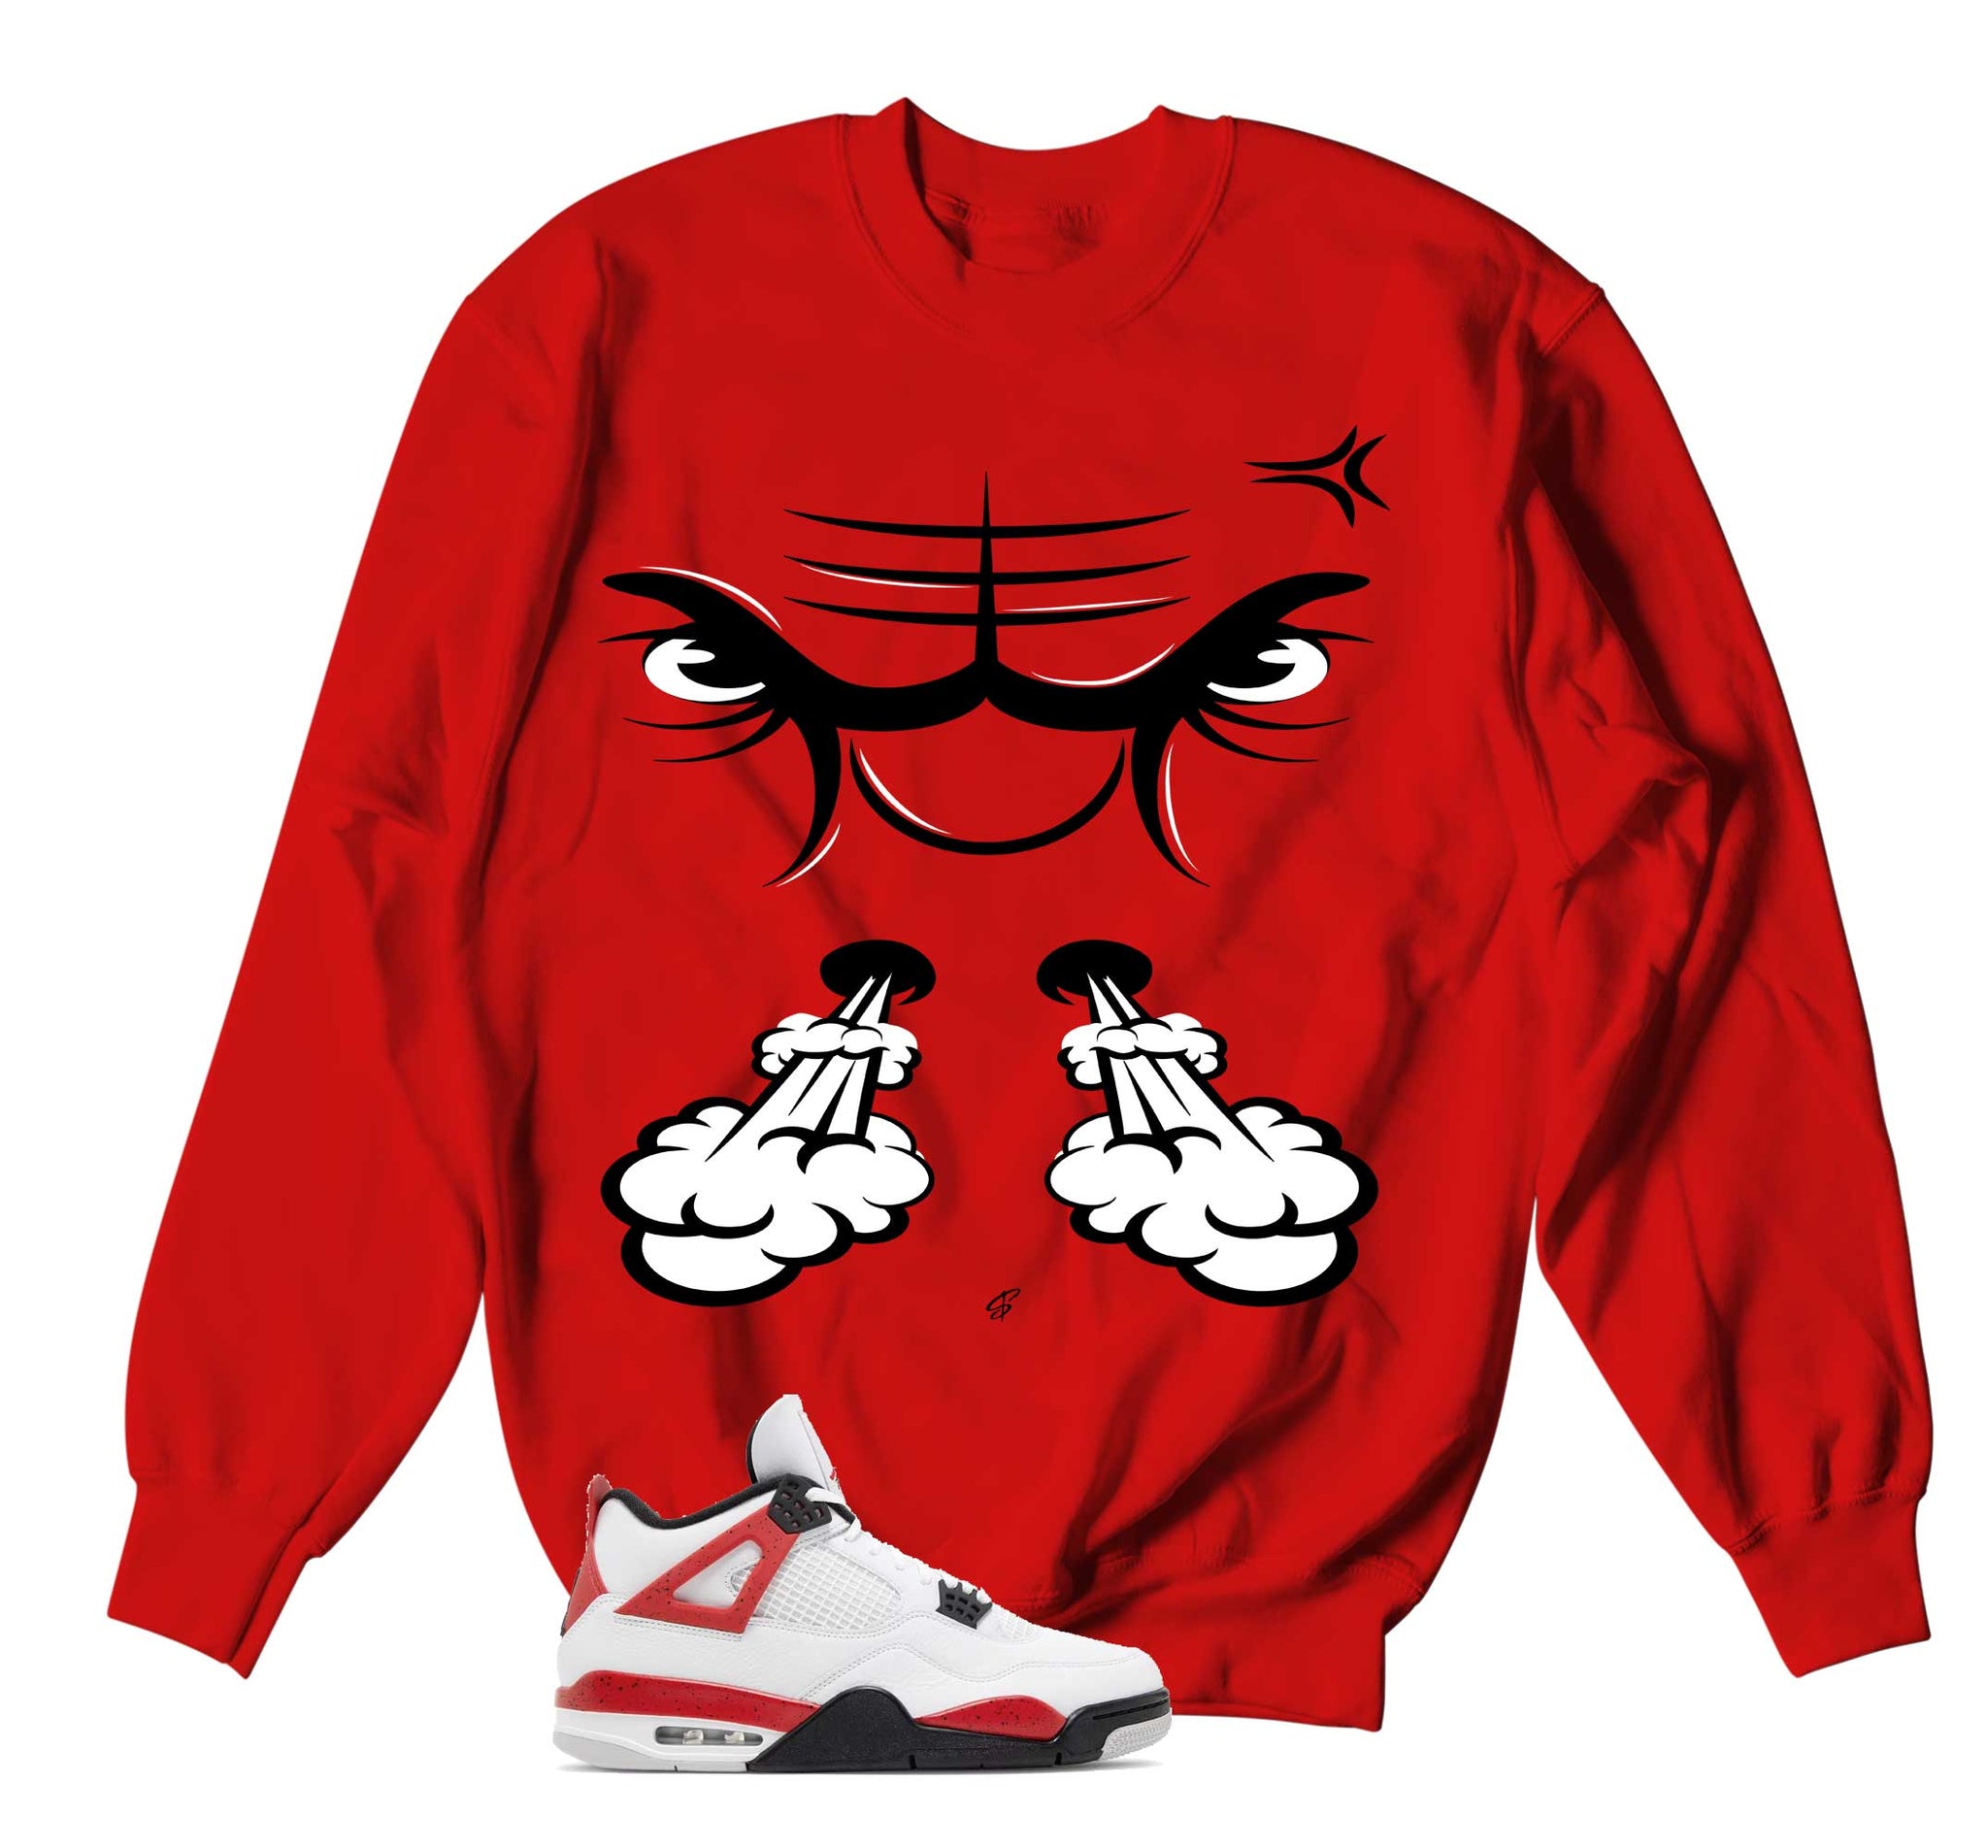 Retro 4 Red Cement Sweater - Raging Face - Red